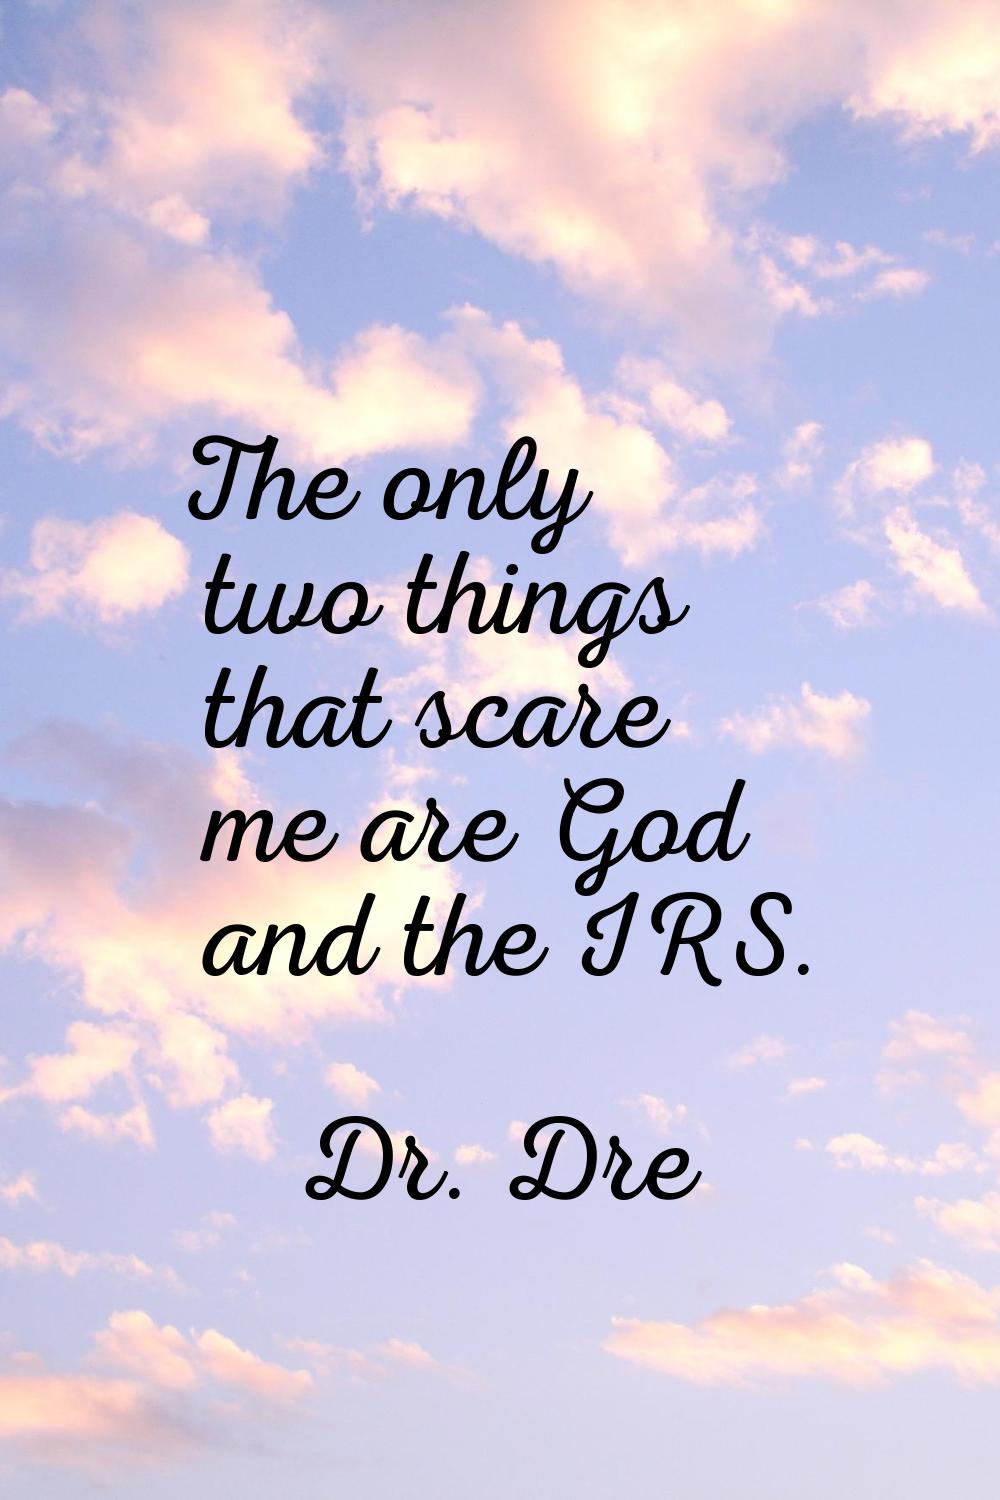 The only two things that scare me are God and the IRS.